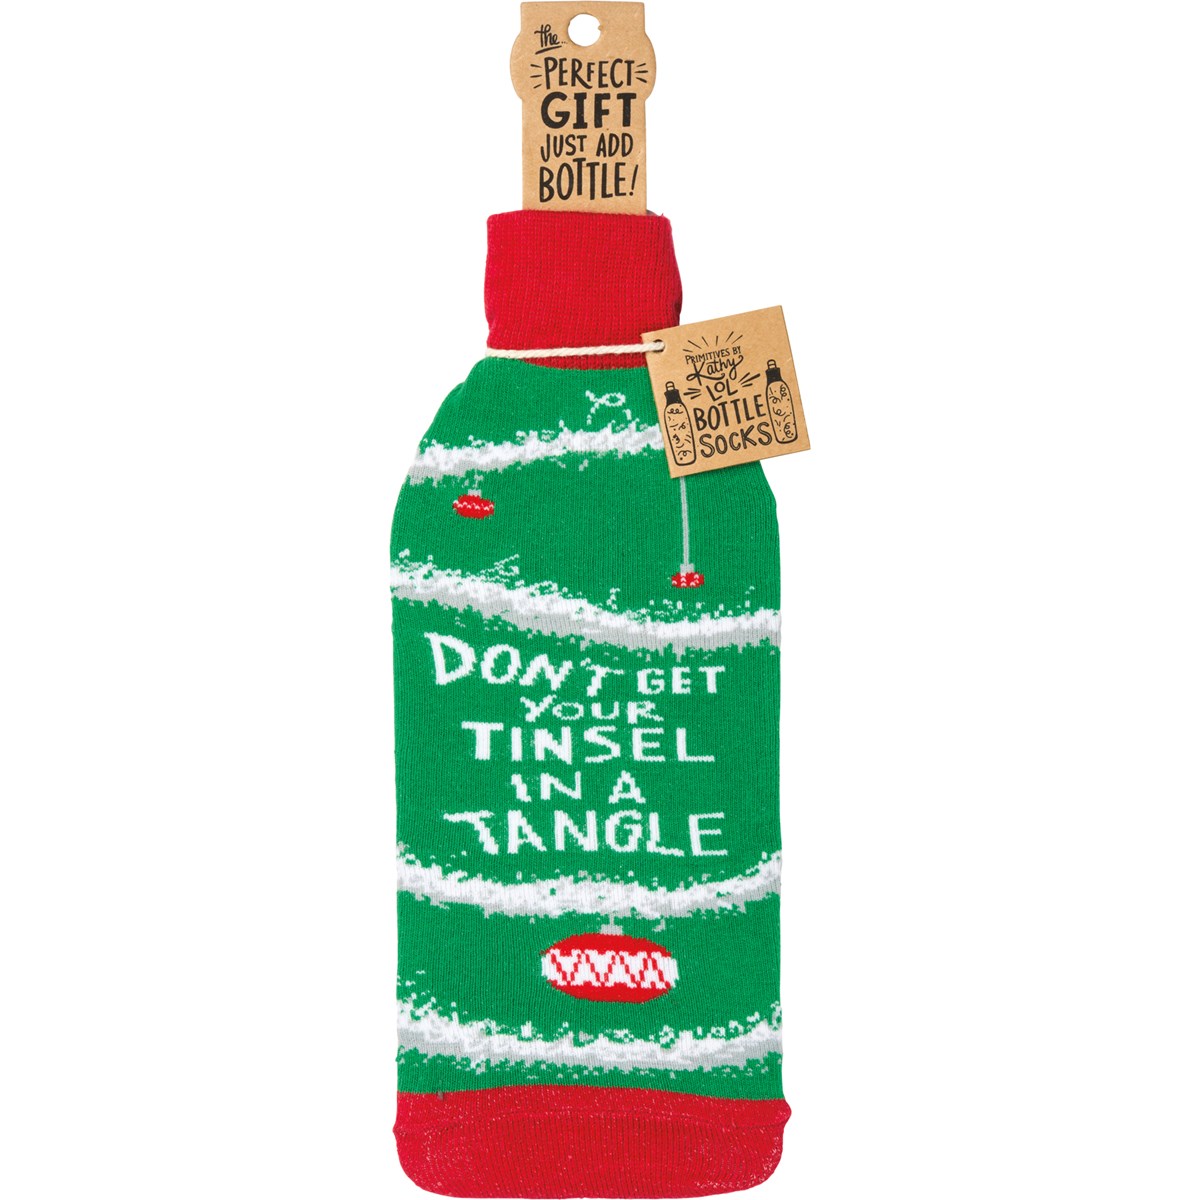 Don't Get Your Tinsel In A Tangle Bottle Sock - Cotton, Nylon, Spandex